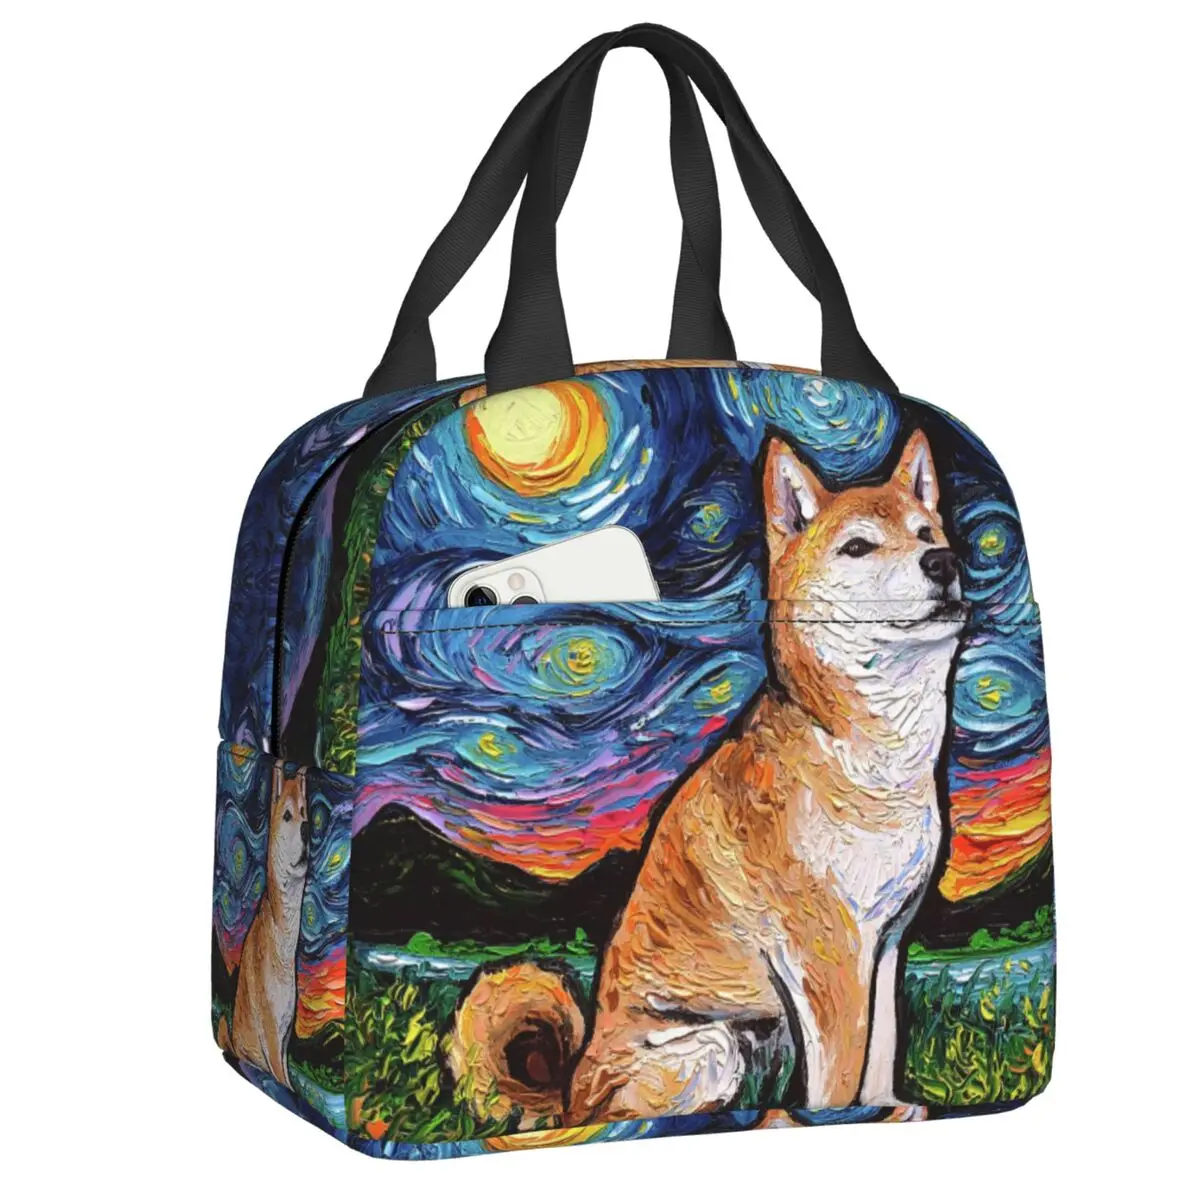 

Shiba Inu Starry Night Insulated Lunch Bag for Women Men Portable Pet Dog Lover Warm Cooler Thermal Lunch Box Office Work School